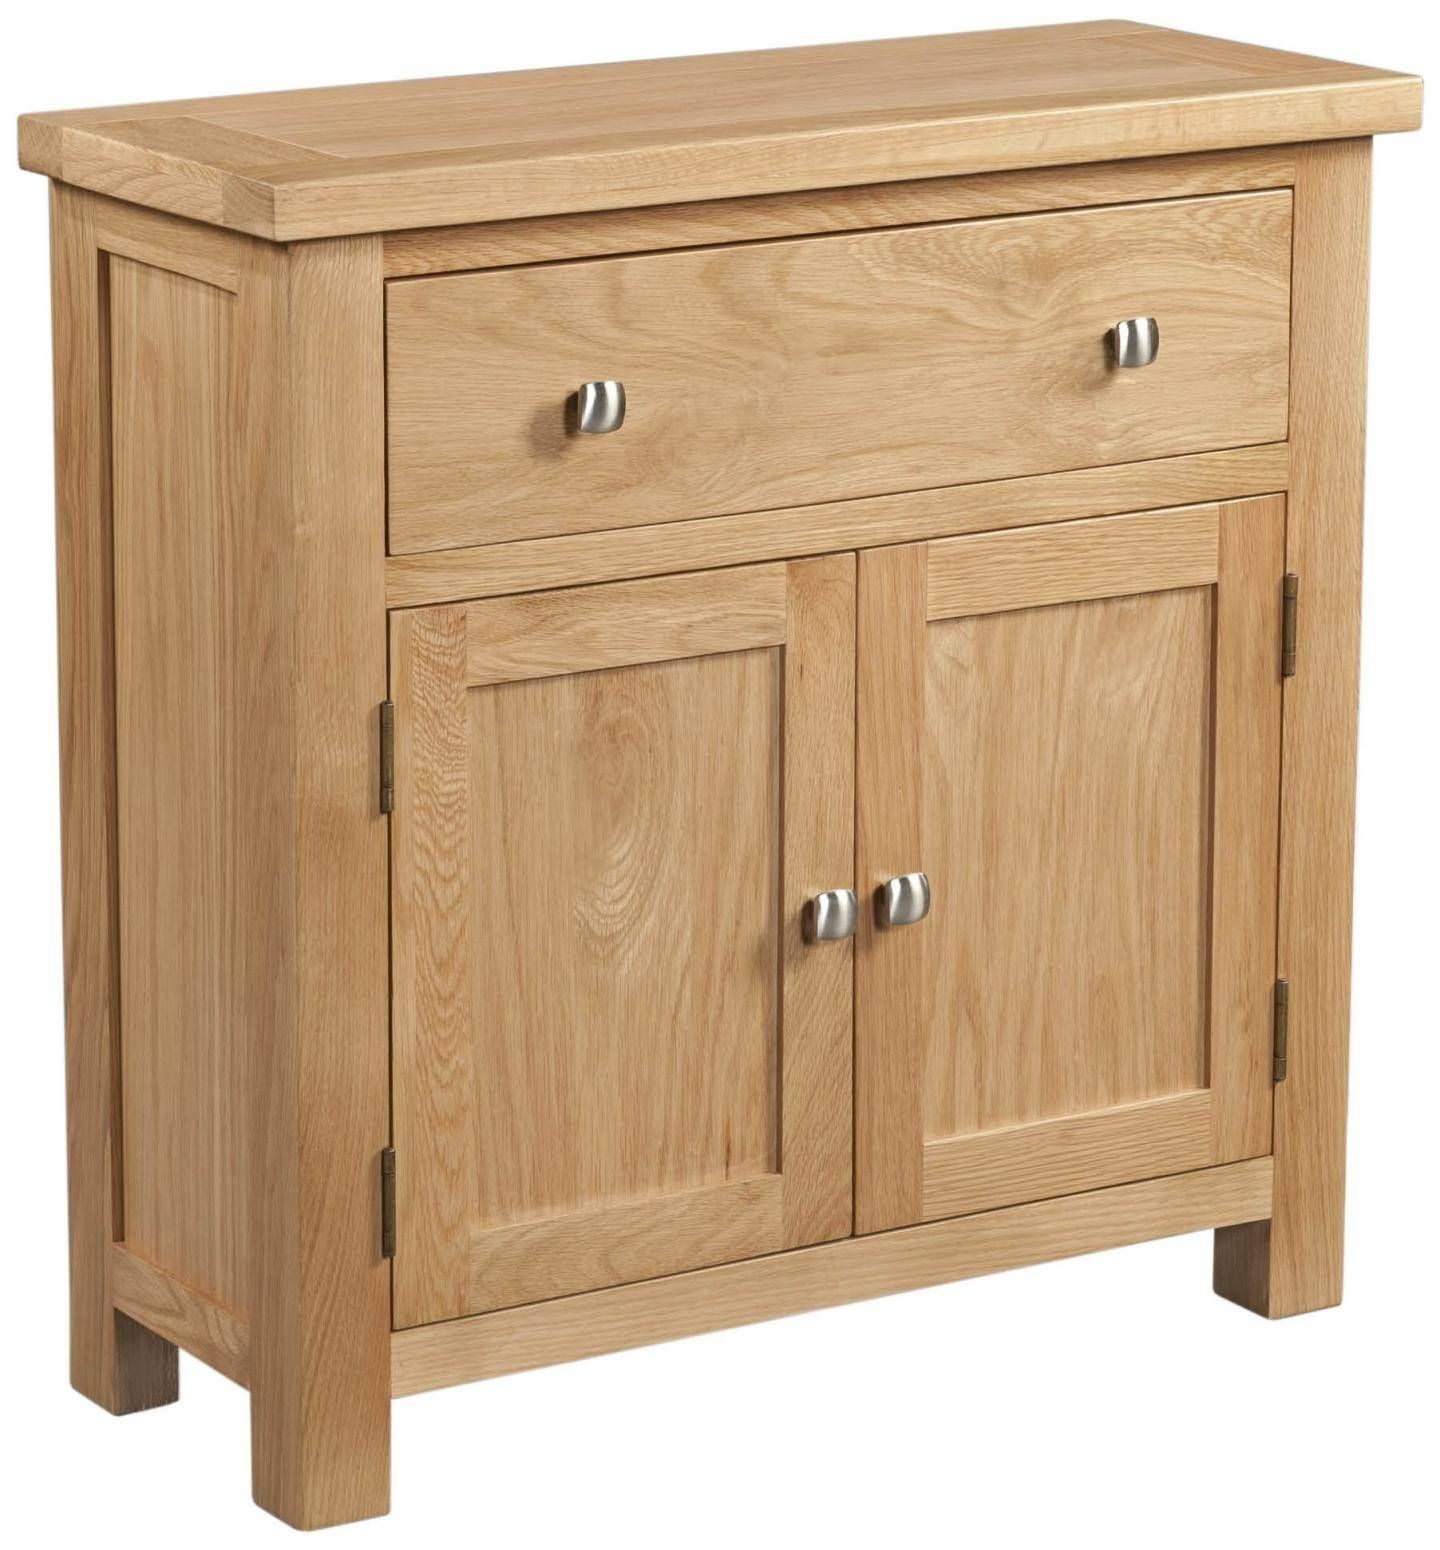 Lovely Pine & Oak Sideboards | Willoby's Furniture Swindon, Wiltshire Intended For Small Sideboards With Drawers (Photo 13 of 30)